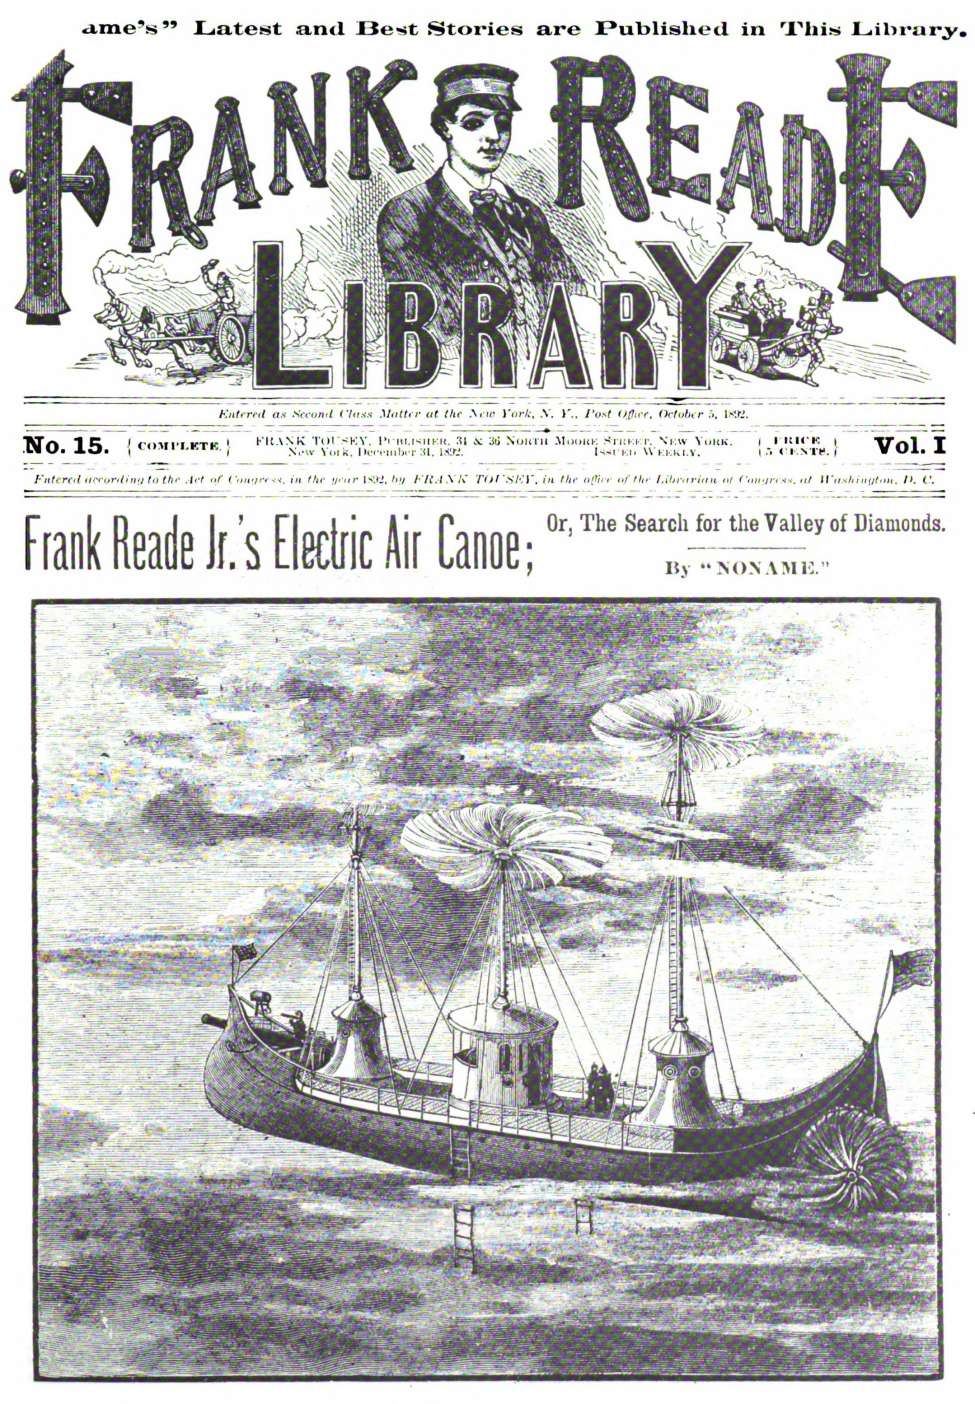 Comic Book Cover For v01 15 - Frank Reade's Electric Air Canoe